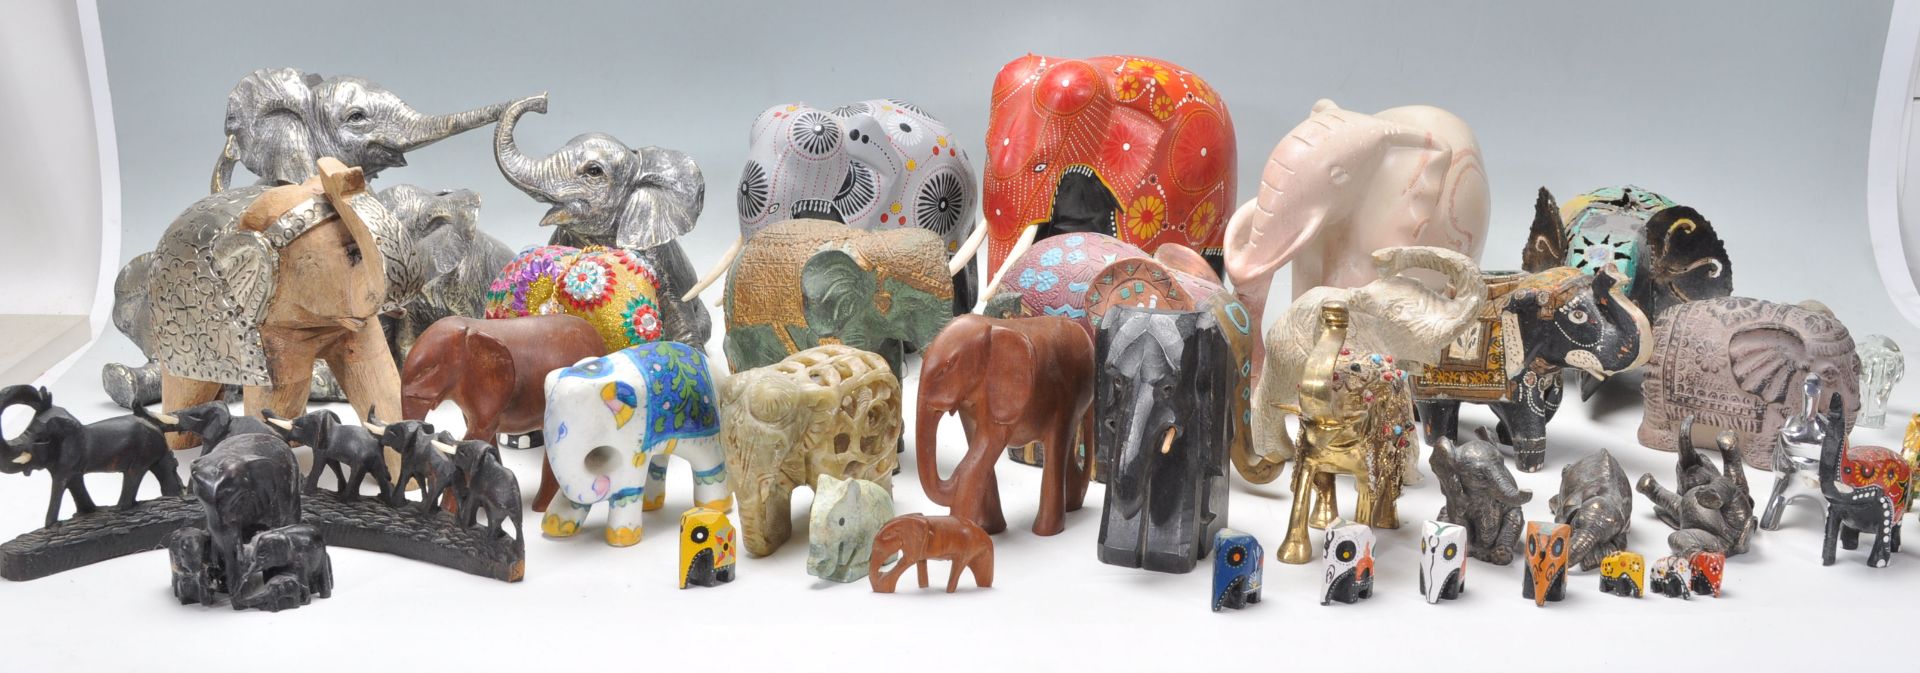 A large collection of vintage / retro 20th century elephant figurines to include largely wooden